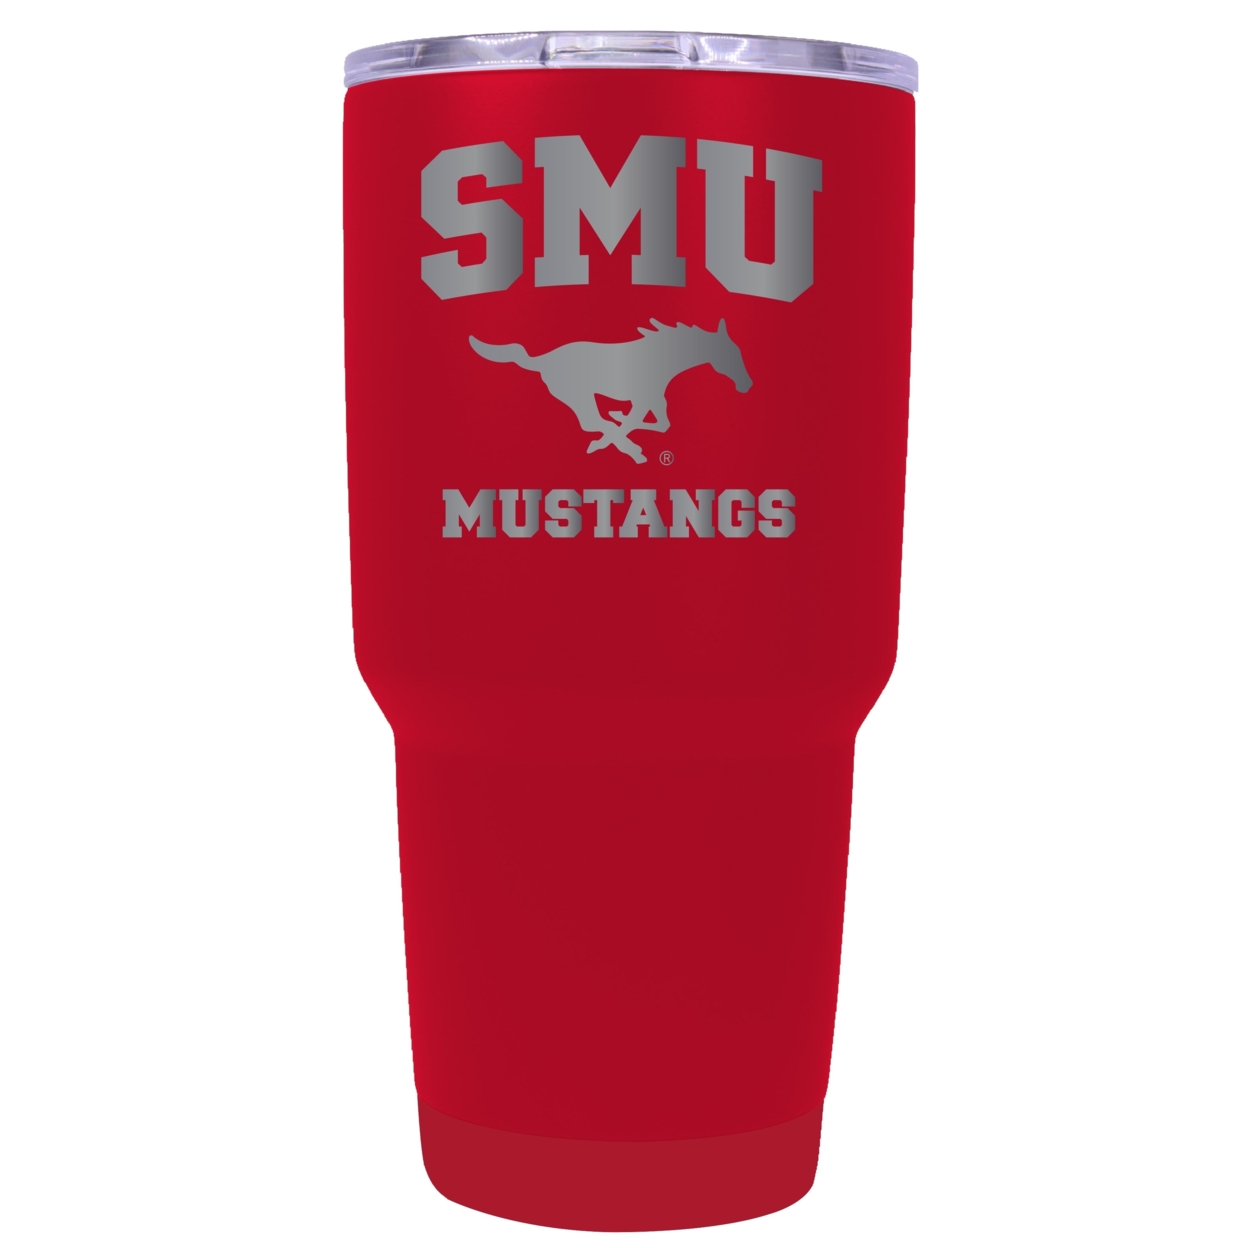 Southern Methodist University 24 Oz Laser Engraved Stainless Steel Insulated Tumbler - Choose Your Color. - Coral